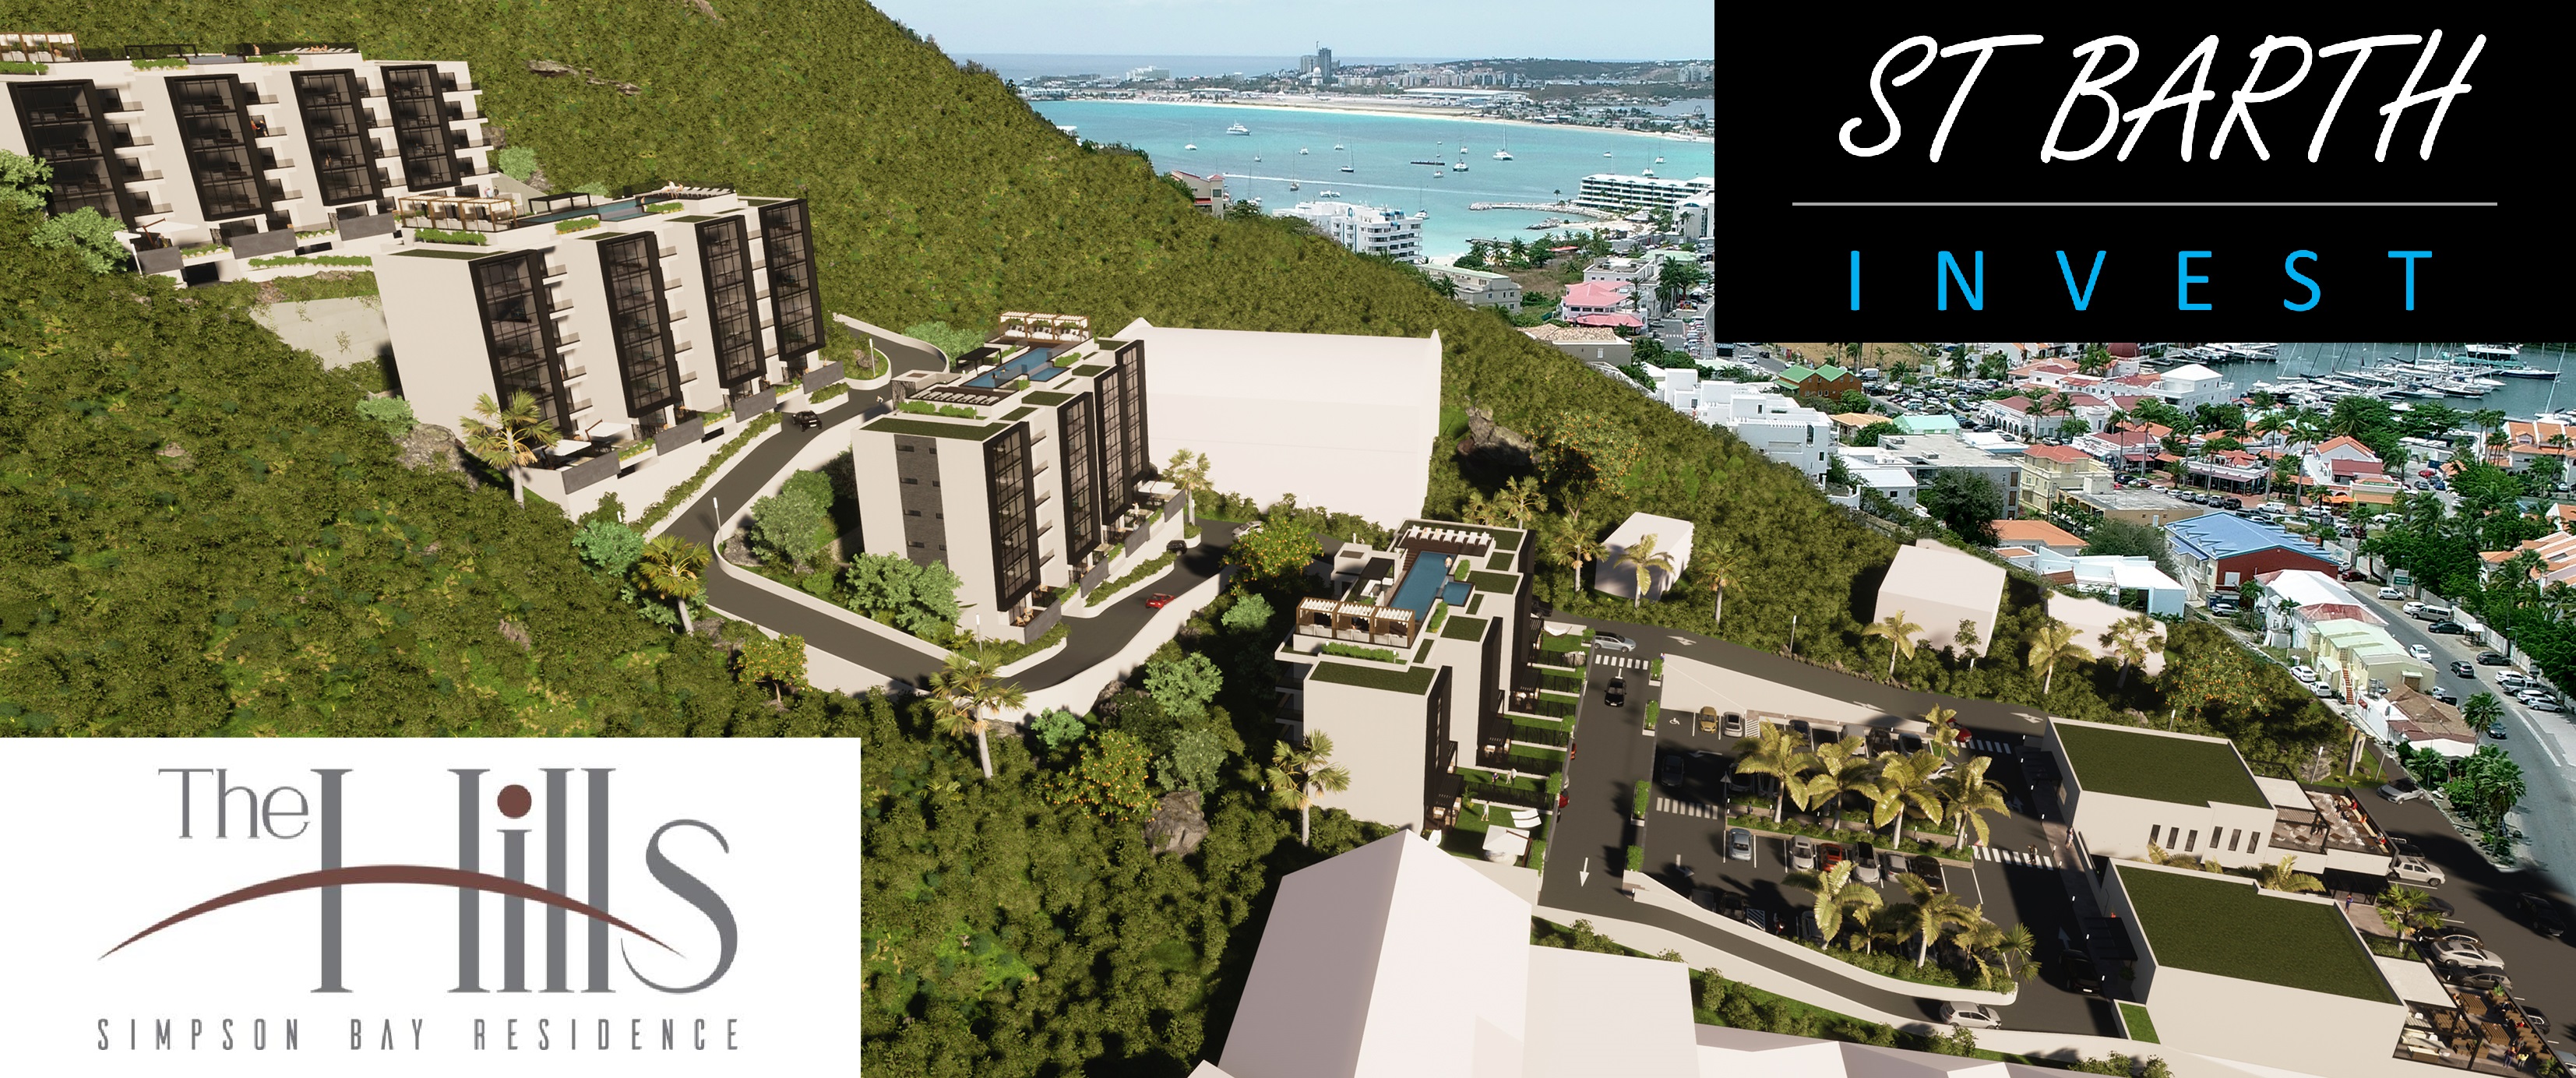 St Barth Invest THE HILLS residence - Simpson Bay - Apartments & shops St. Martin